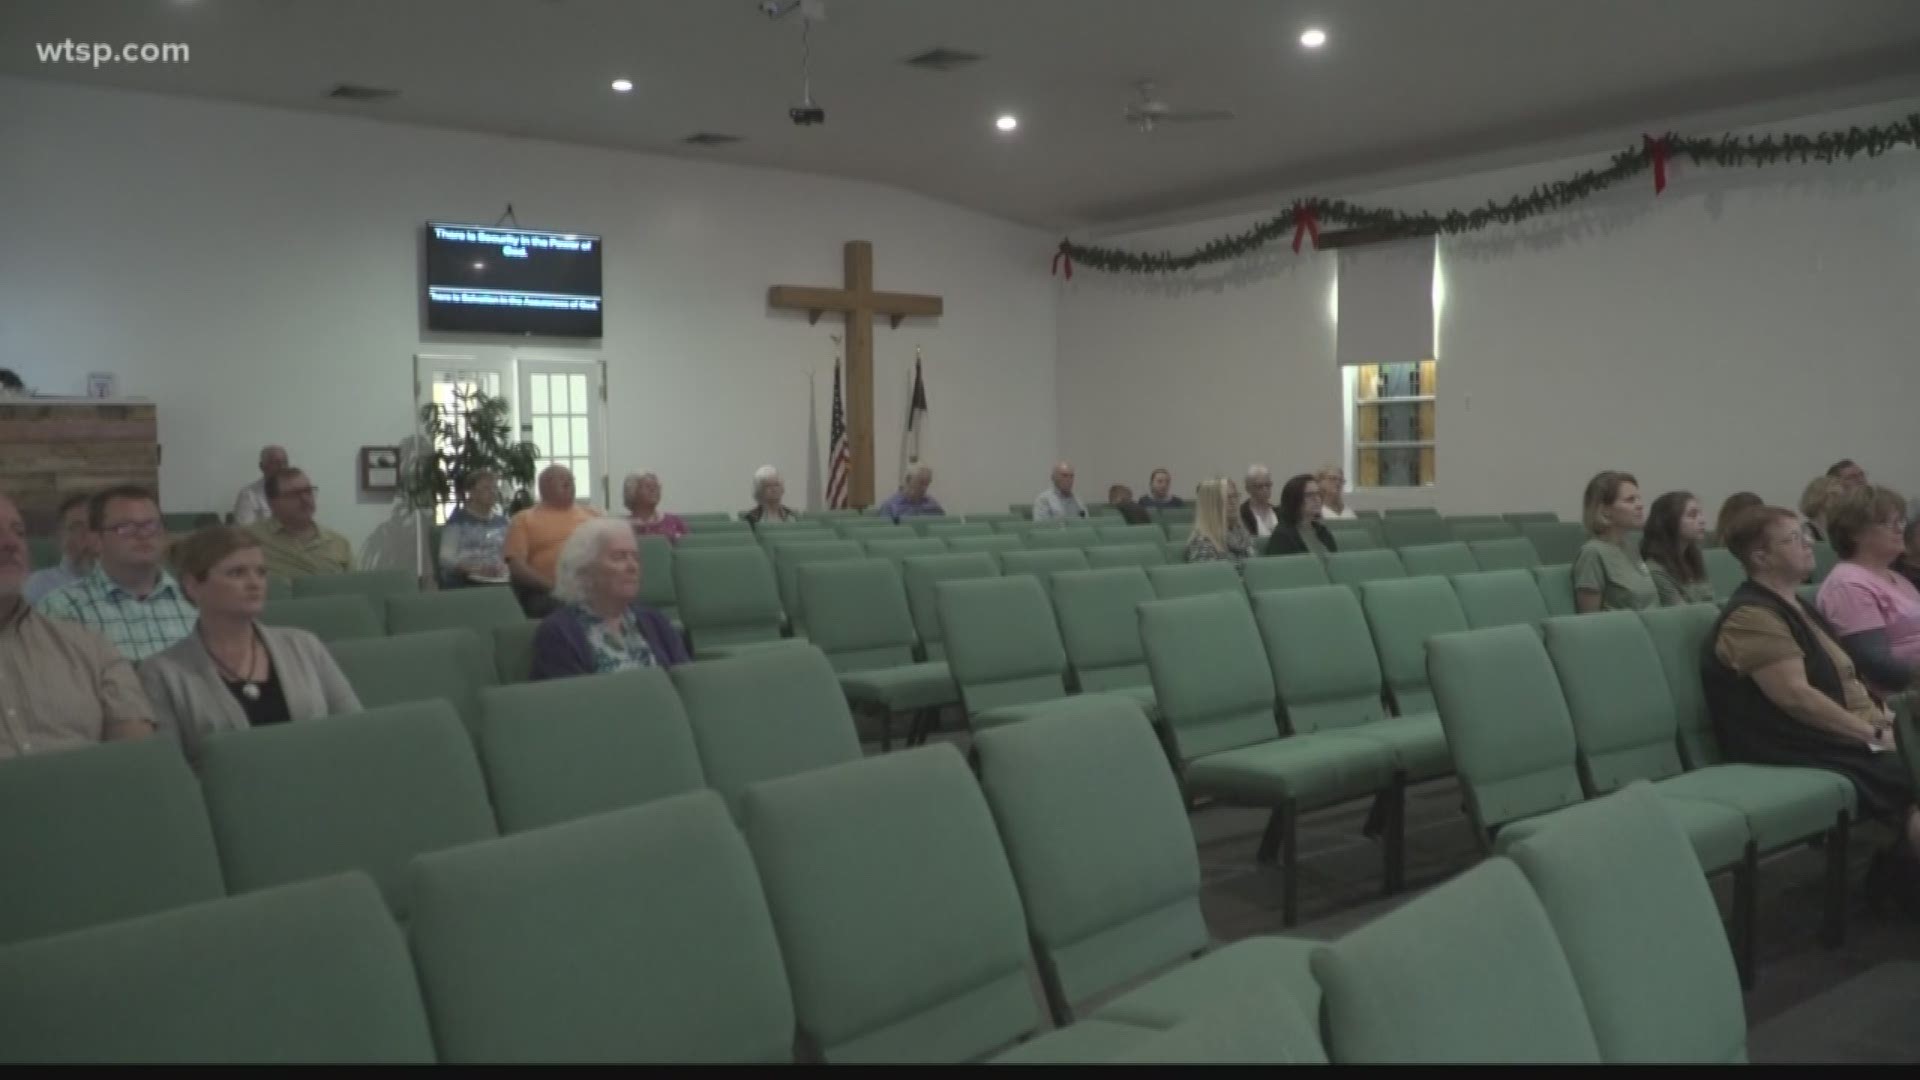 Five weeks after an EF-2 tornado ripped up Mt. Tabor Baptist Church, worshipers returned to their sanctuary for the first time.